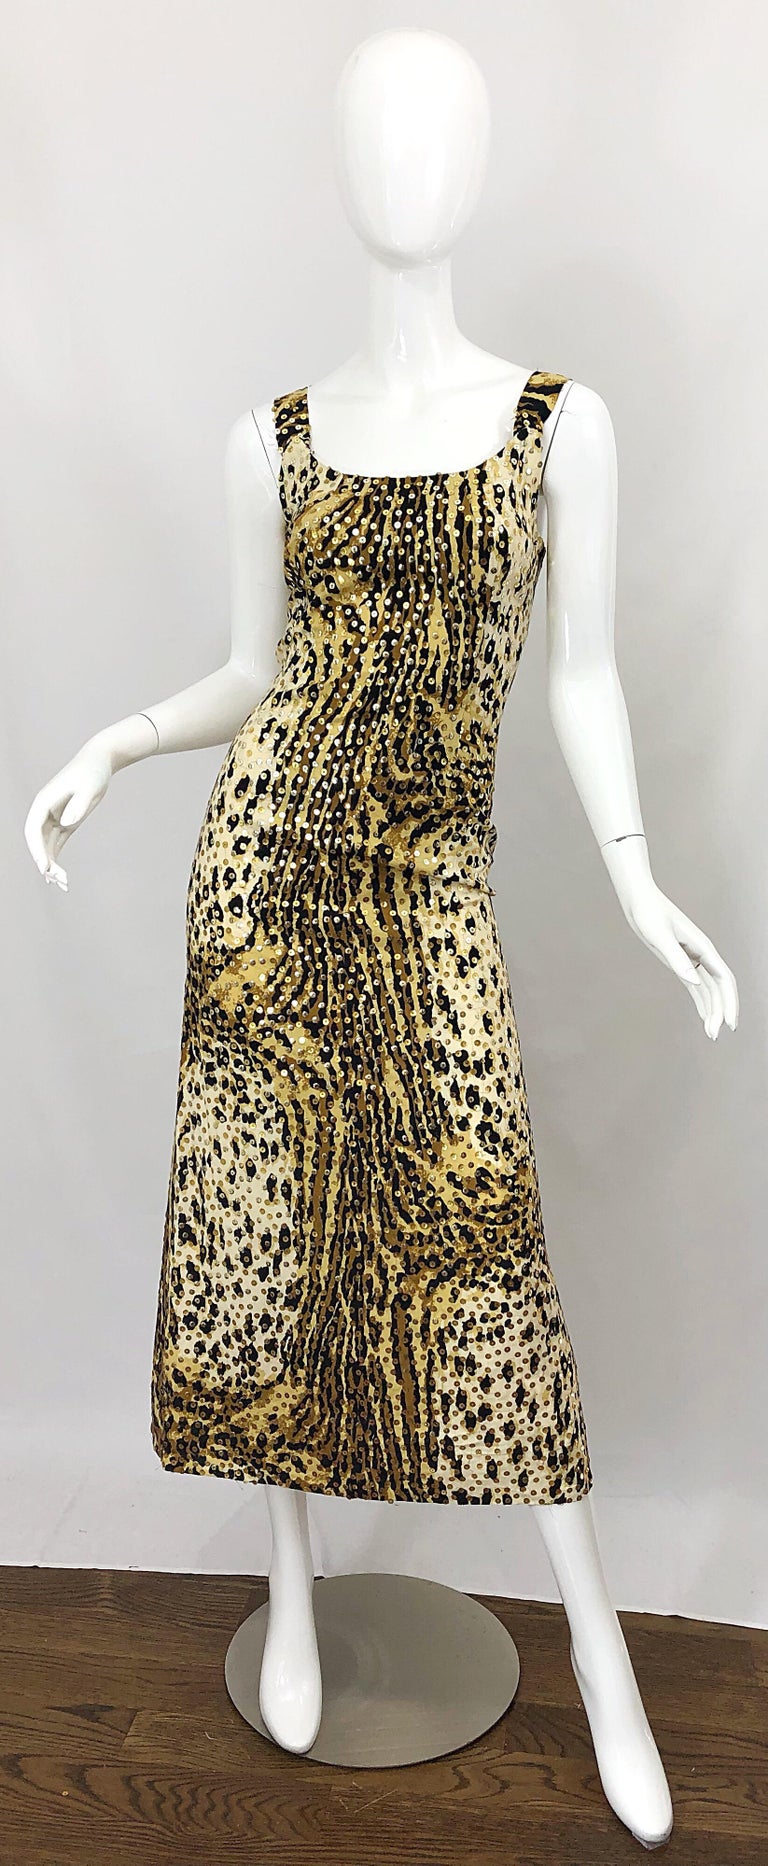 Chic early 70s MOLLIE PARNIS leopard / cheetah print sequined midi dress! Features classic leopard print with hundreds of 
hand-sewn gold and silver sequins throughout. Perfect weight cotton fabric. Full metal zipper up the back with hook-and-eye